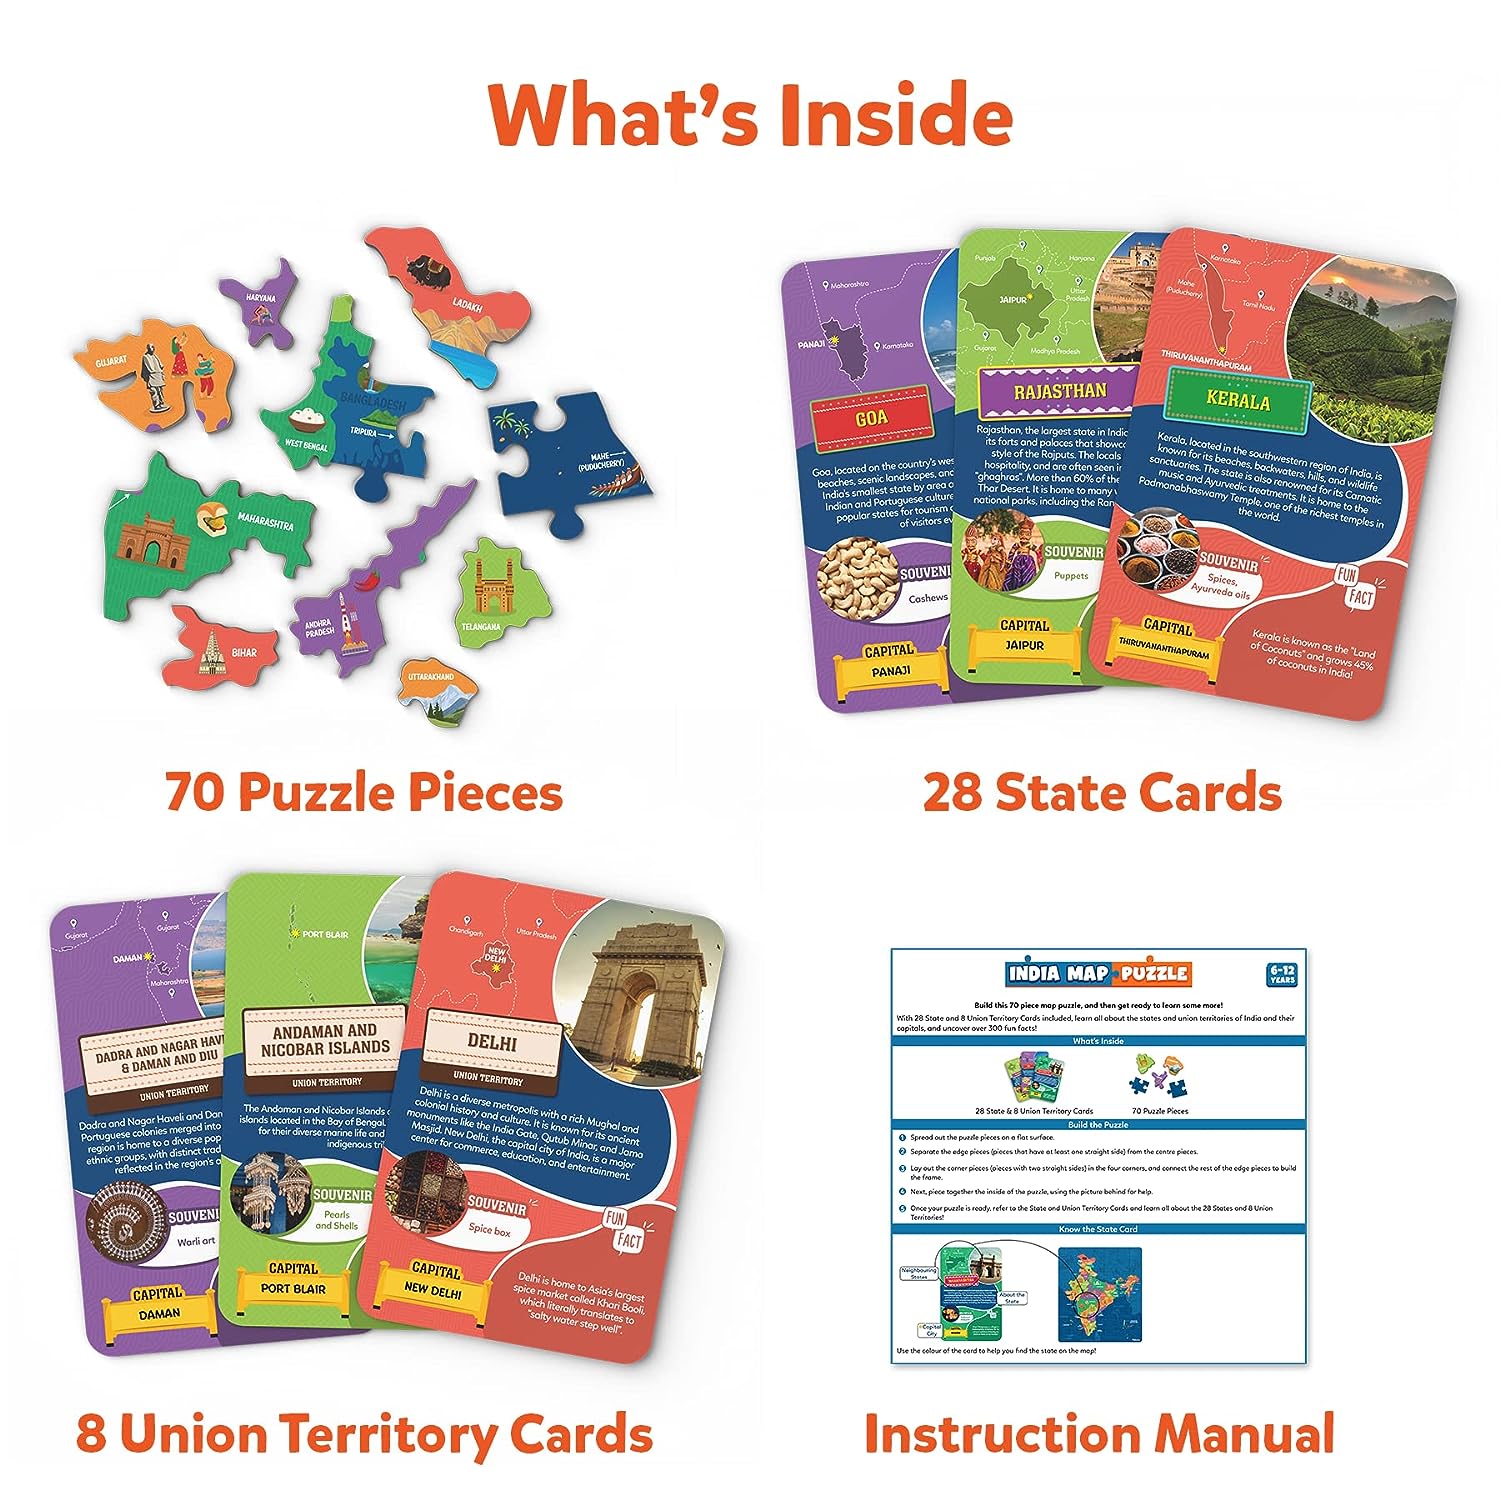 Skillmatics India Map Puzzle - 70 Pieces, Educational Toy for Learning 300+ Facts About India, Gifts for Ages 6 to 12